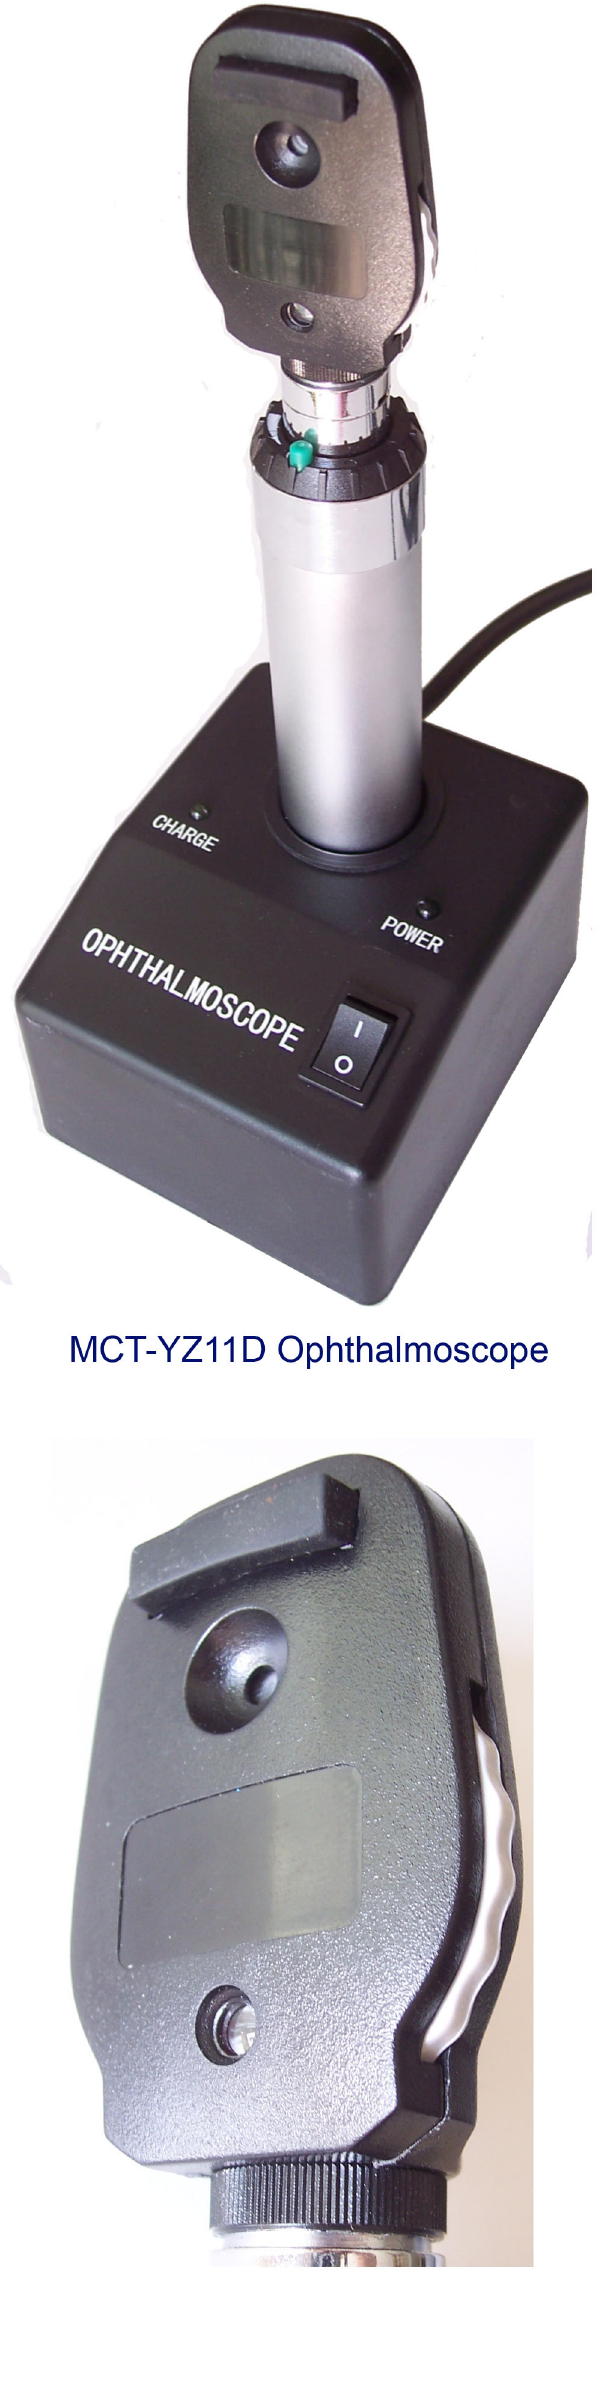 MCT-YZ11D Ophthalmoscope